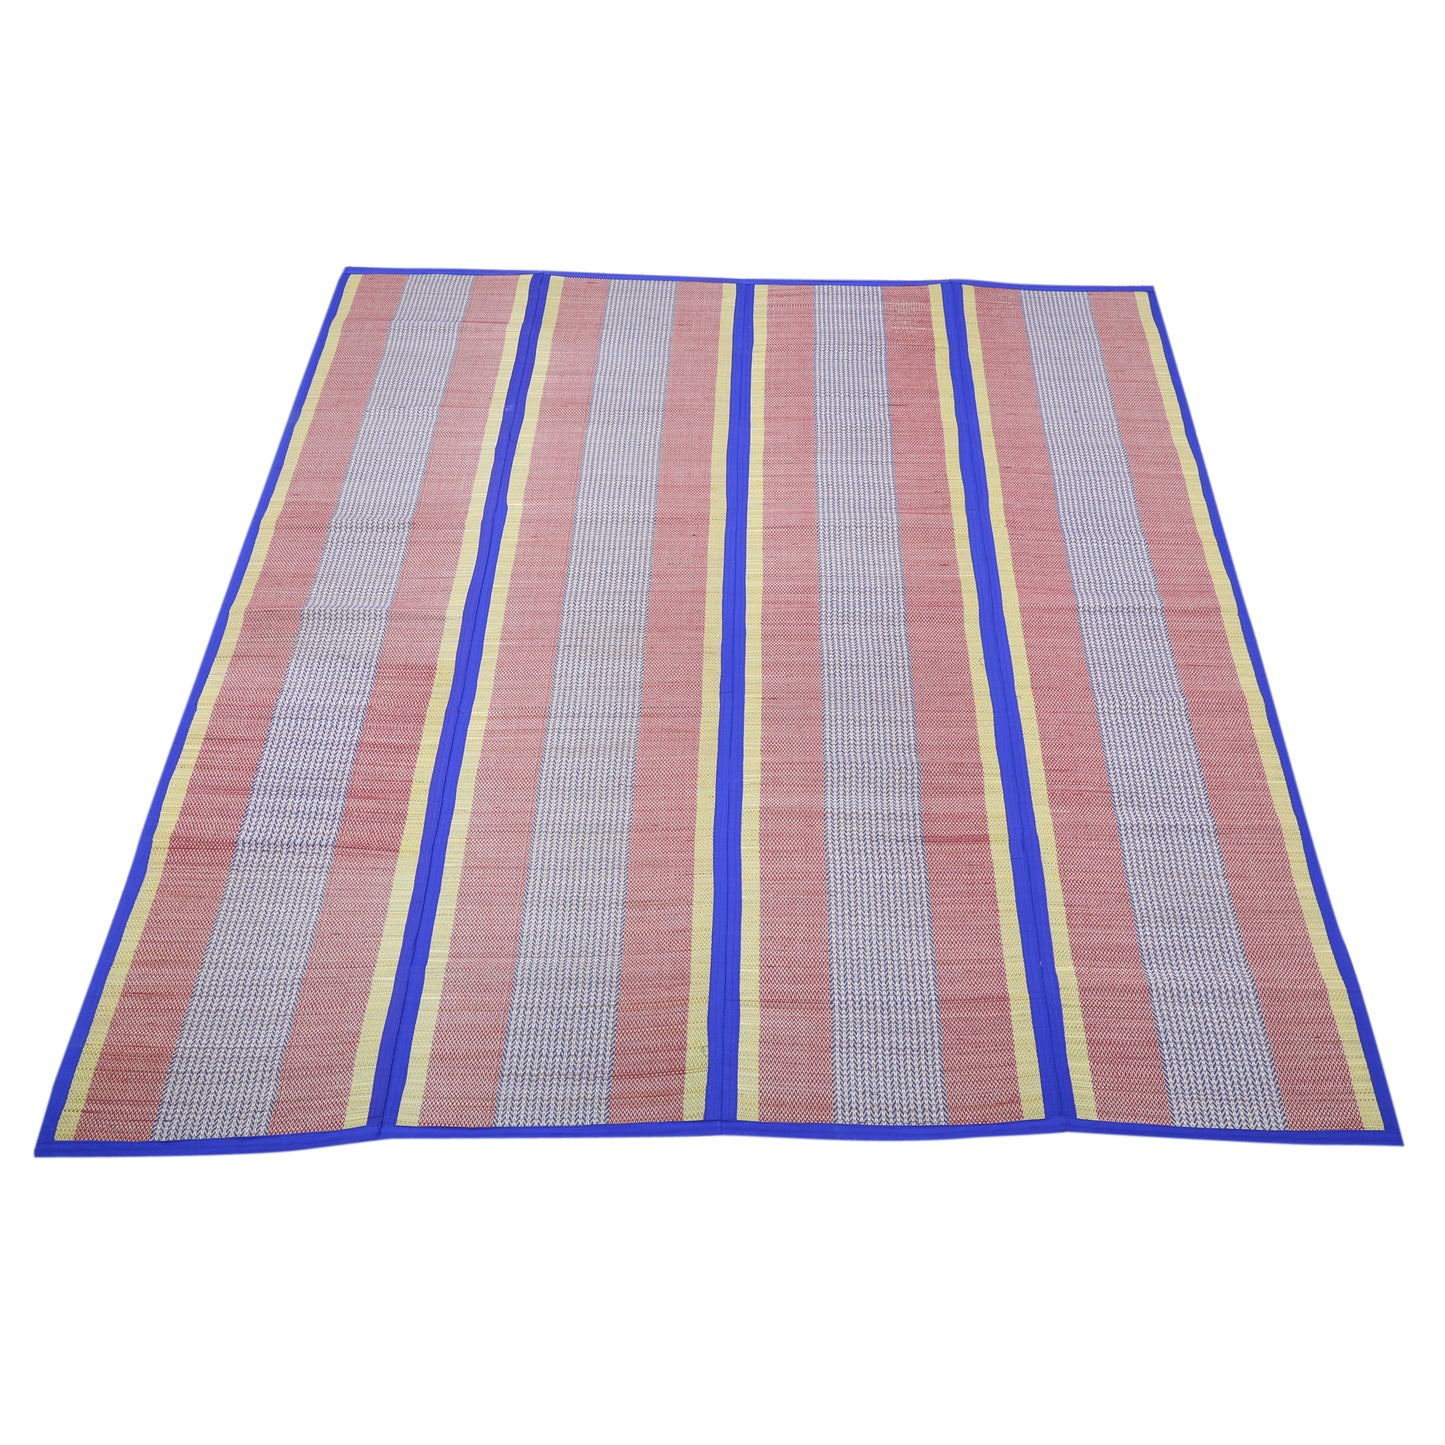 Designer Organic Chatai Mat Foldable made of Madurkathi Grass for Indoor and Outdoor Usages - T3-45